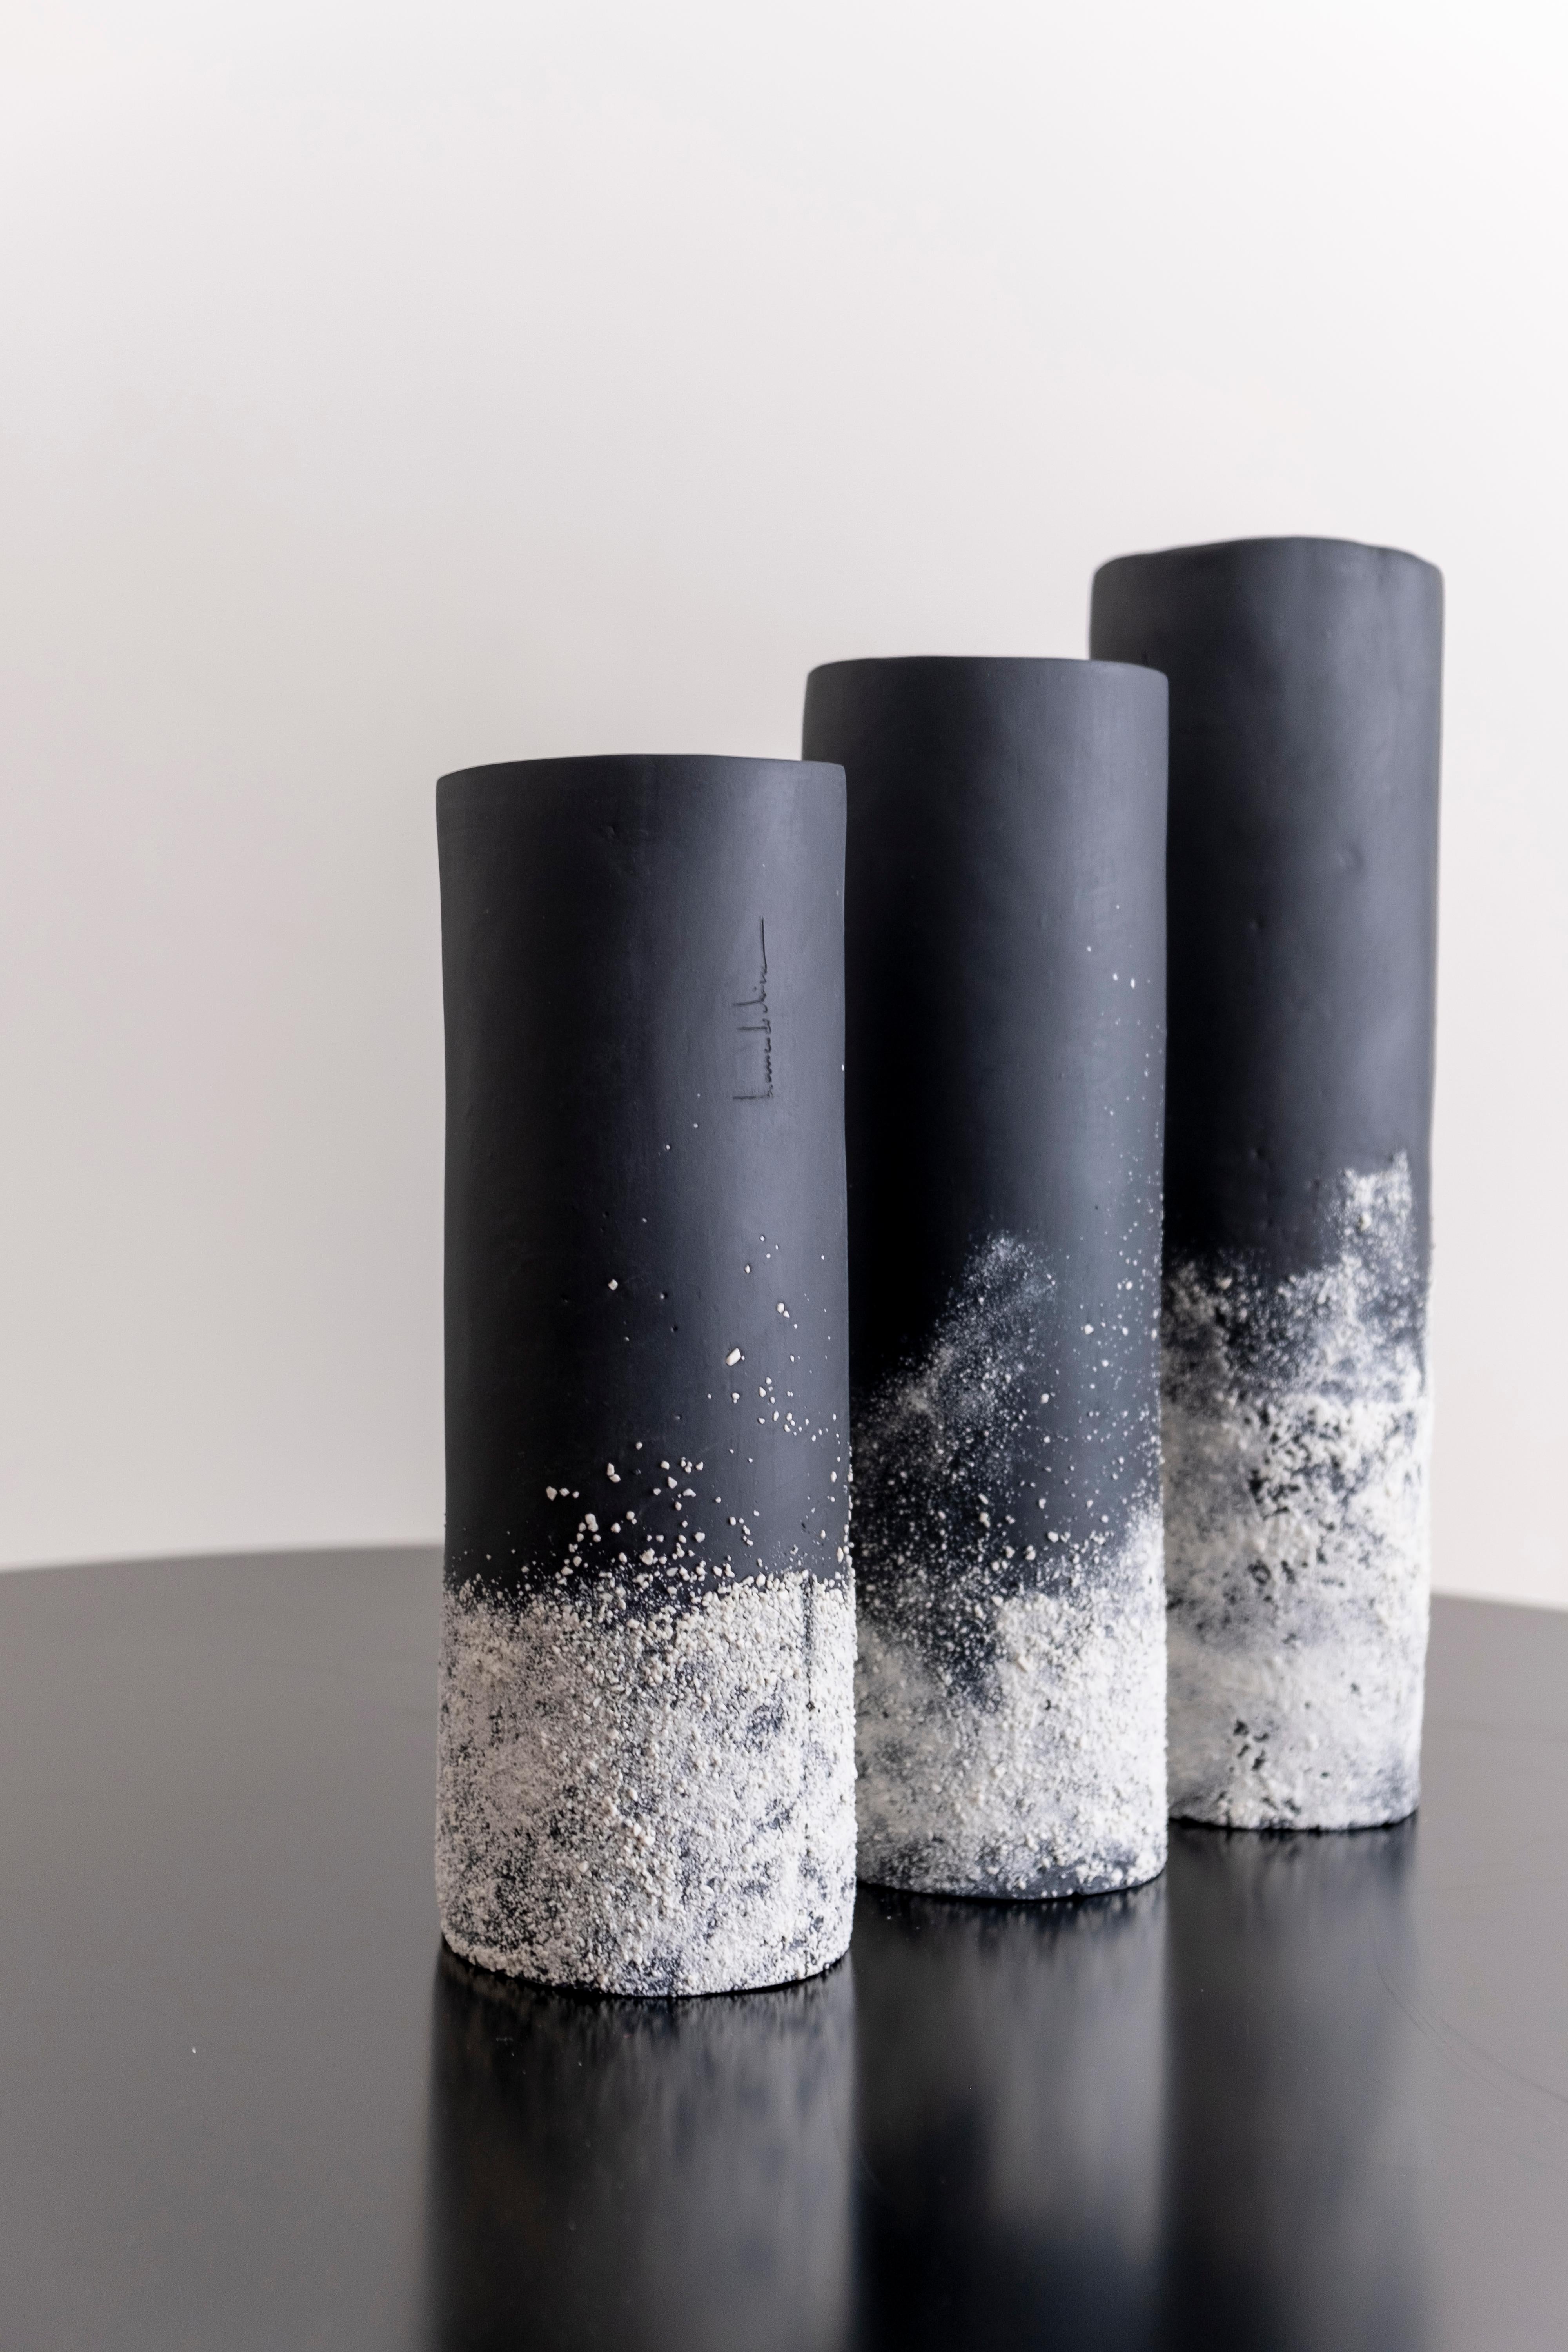 Set of 3 sand vases by Alice Reina Biancodichina
Dimensions: 
Small 9,5 x H 28cm
Medium 9,5 x H 31cm
Large 9,5 x H 35cm. 
Materials: Limoges porcelain, pigment, glaze. 

Technique: Slab building technique. The “sand effect” is made of